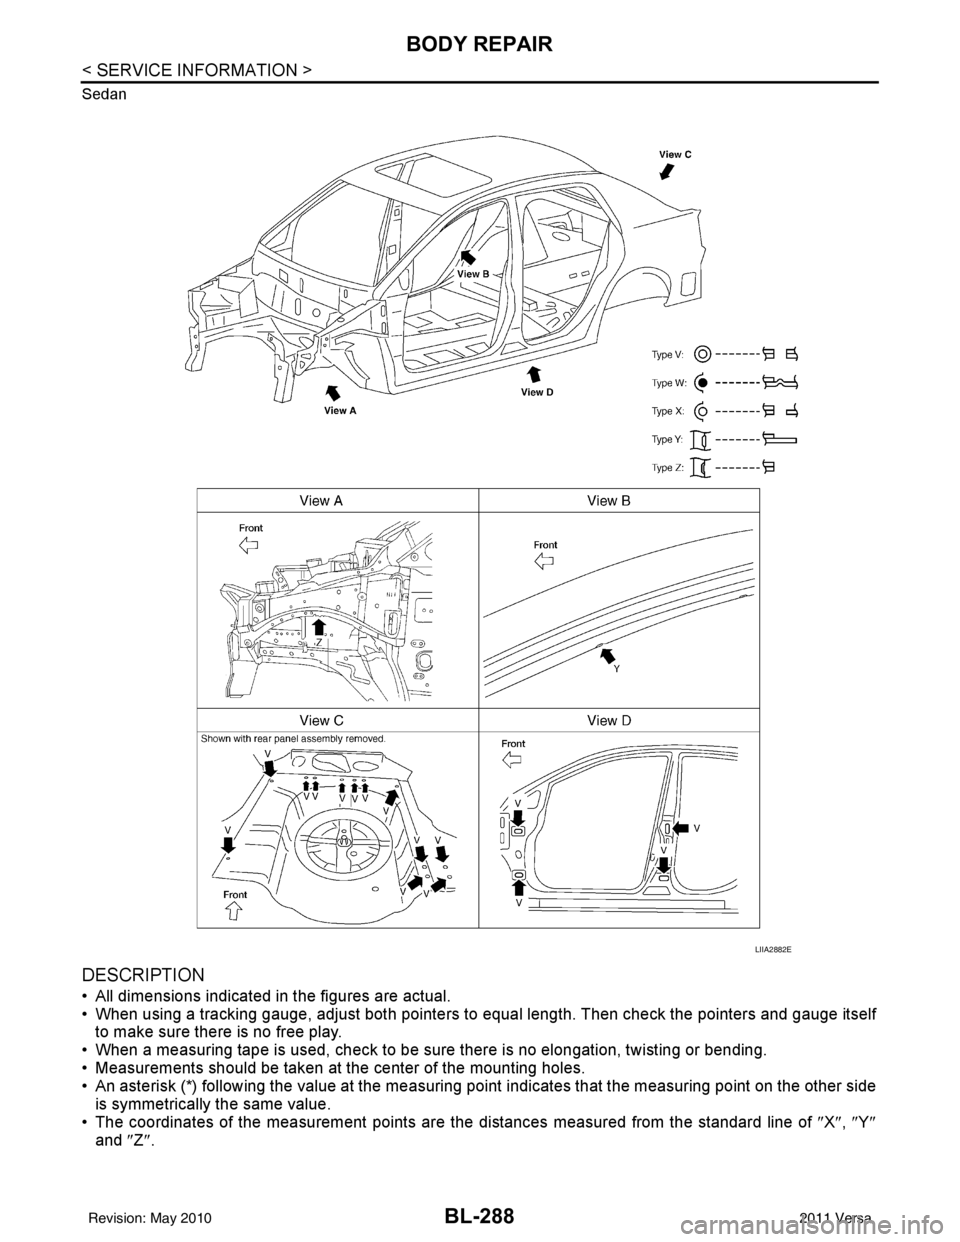 NISSAN LATIO 2011  Service Repair Manual BL-288
< SERVICE INFORMATION >
BODY REPAIR
Sedan
DESCRIPTION
• All dimensions indicated in the figures are actual.
• When using a tracking gauge, adjust both pointers to equal length. Then check t